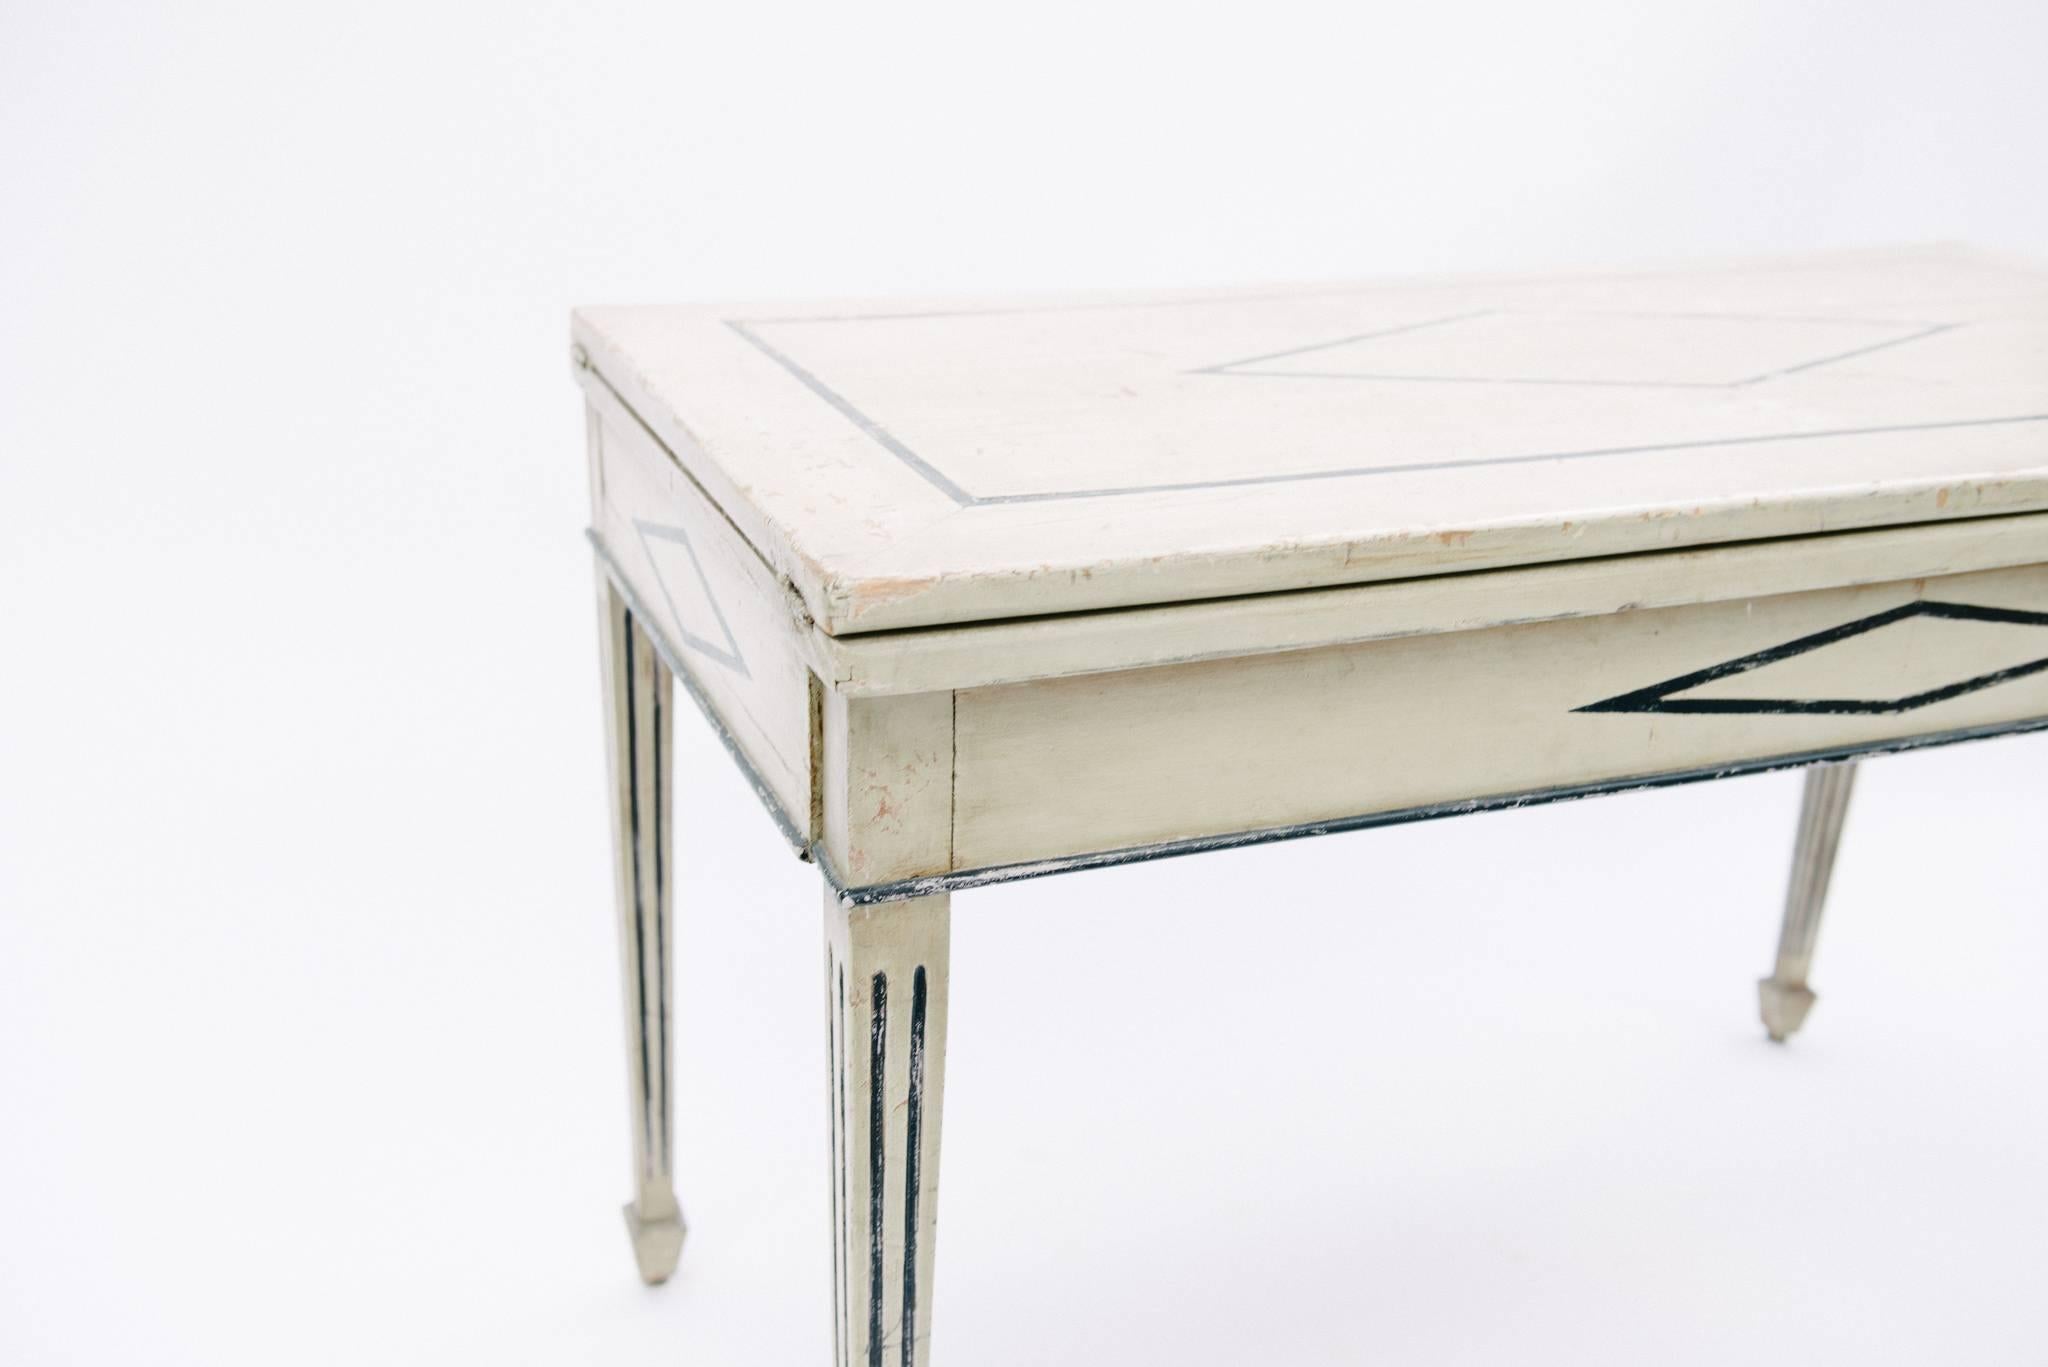 Fabulous 19th century French Directoire style extendable console table. This French neoclassical style table opens and slides to a length of this versatile table can also be used as a game table, centre table or dining table when needed. When